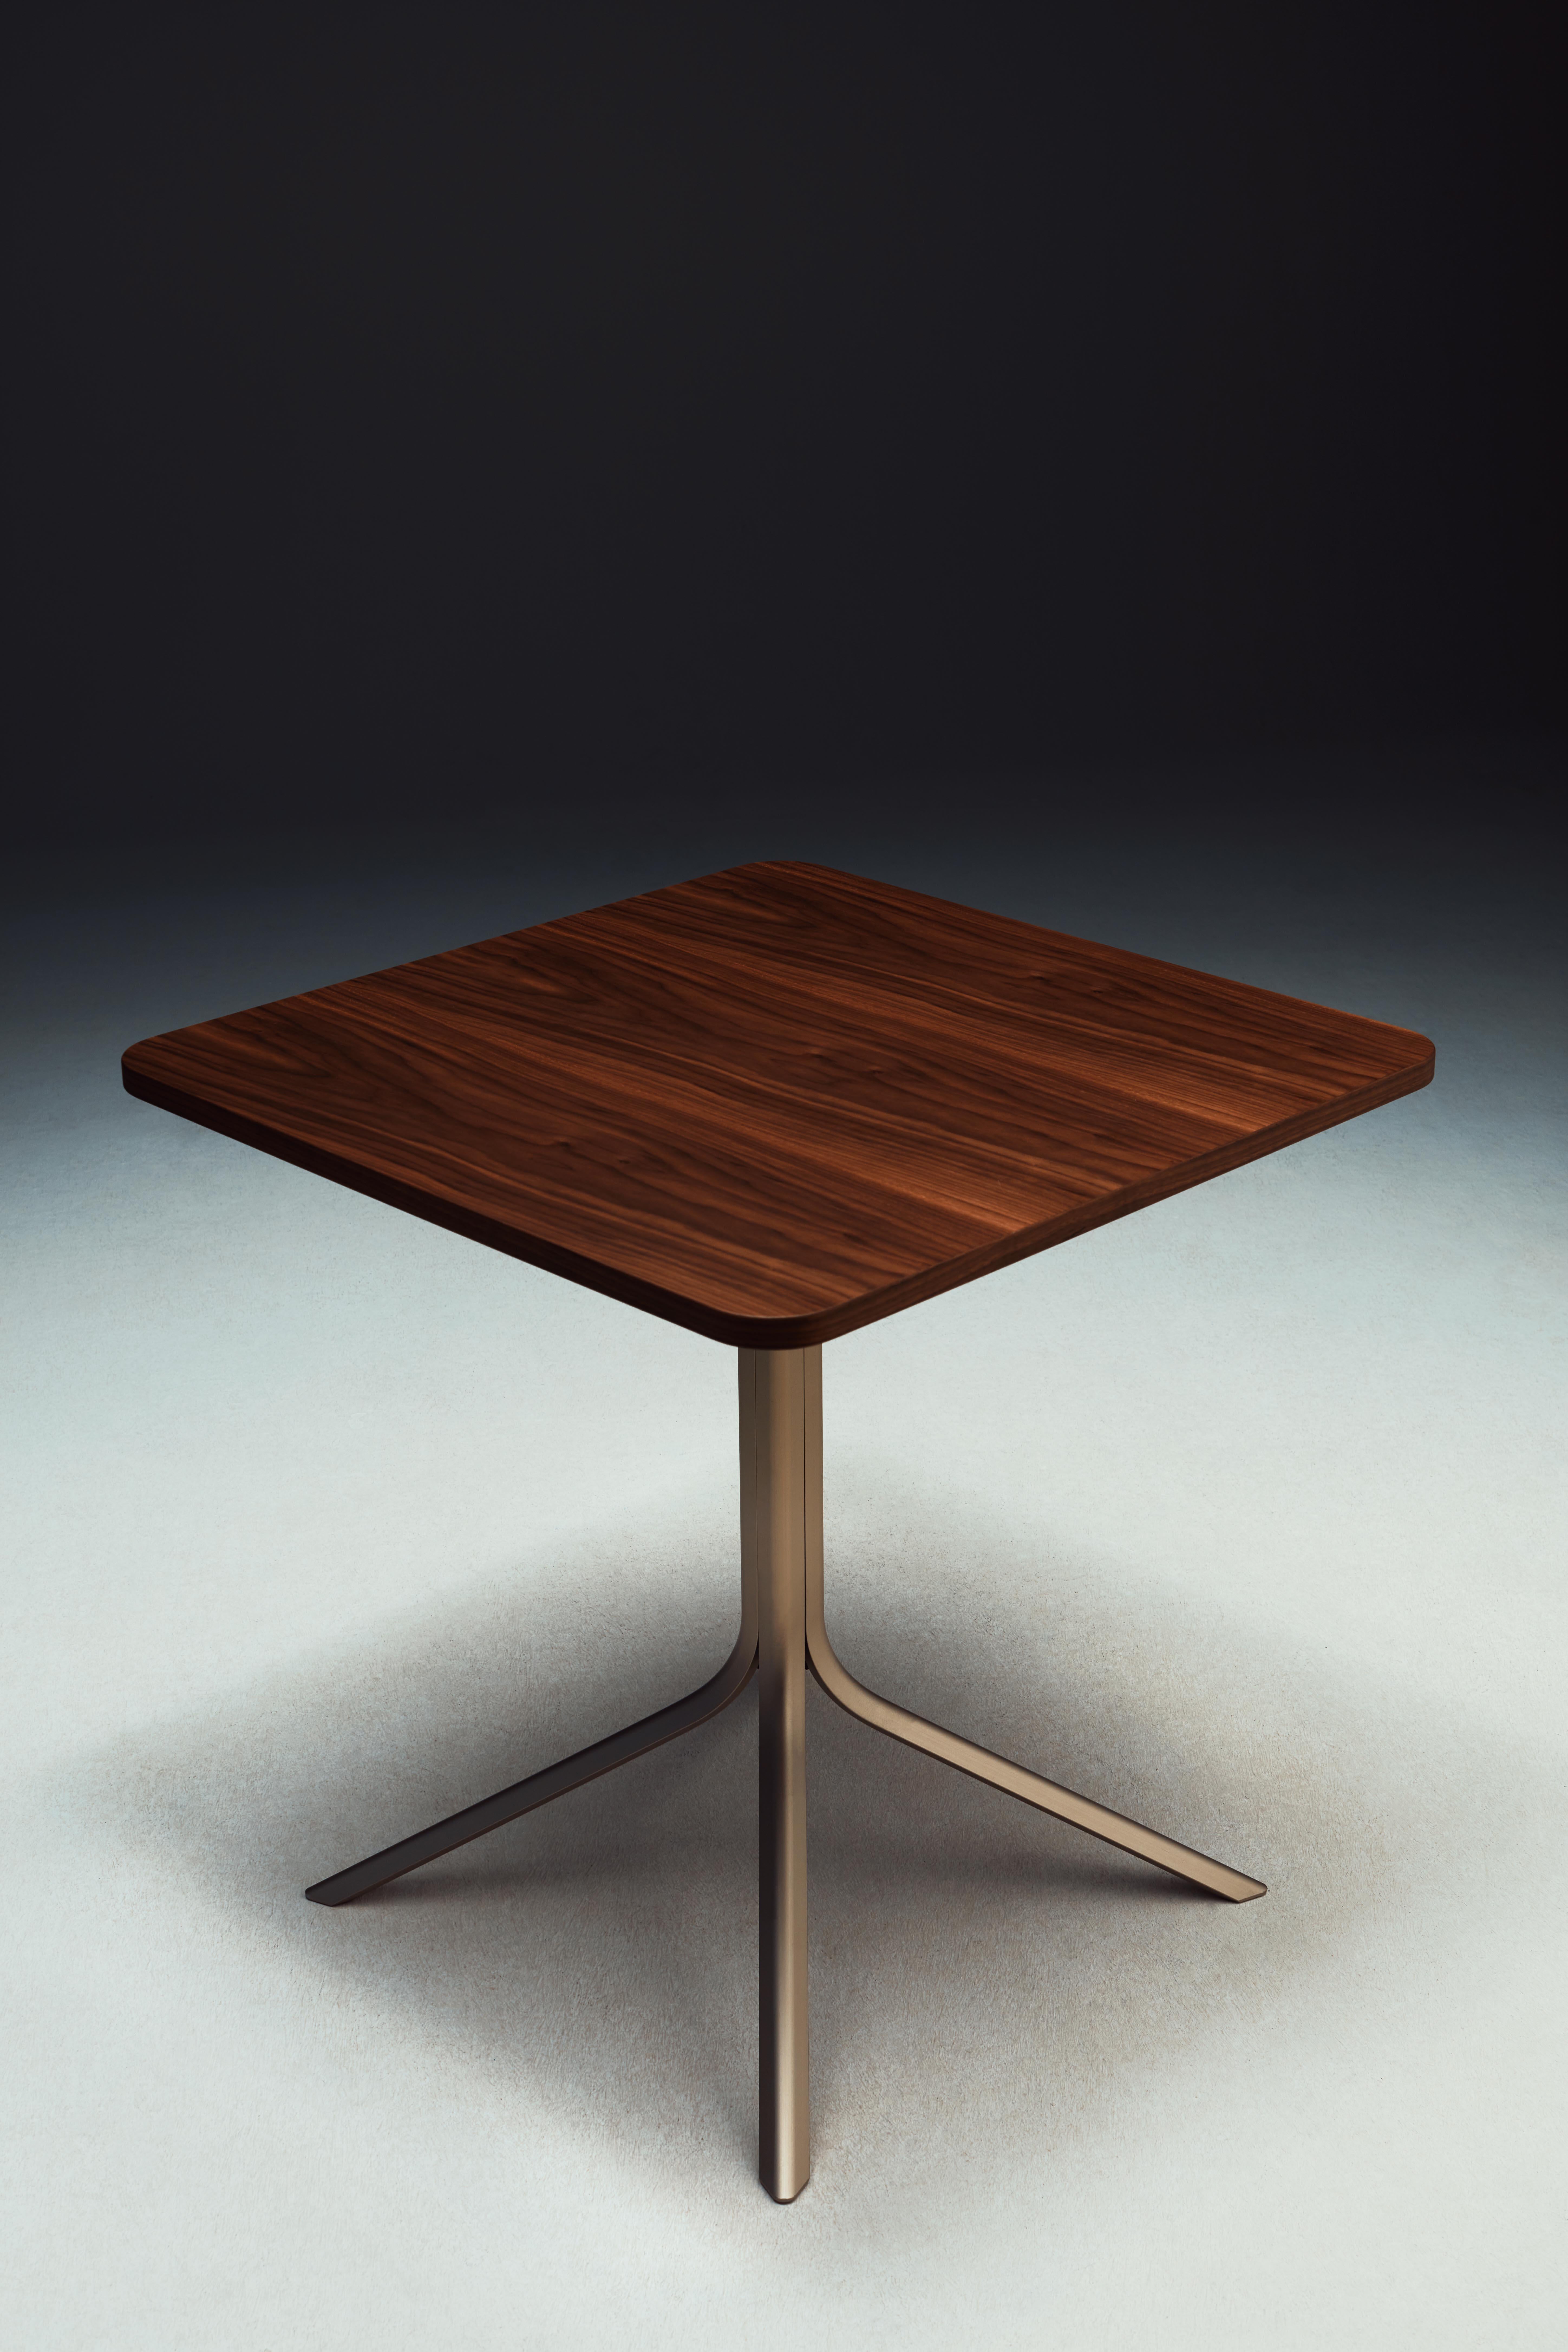 High-Tri Table by Michael Young
Dimensions:W 70 x D 70 x H 110 cm
Materials: Anodized structure, top in noce canaletto veneer
Variations of materials and dimensions available. Please contact us

Michael Young
Michael Young is a world-renowned